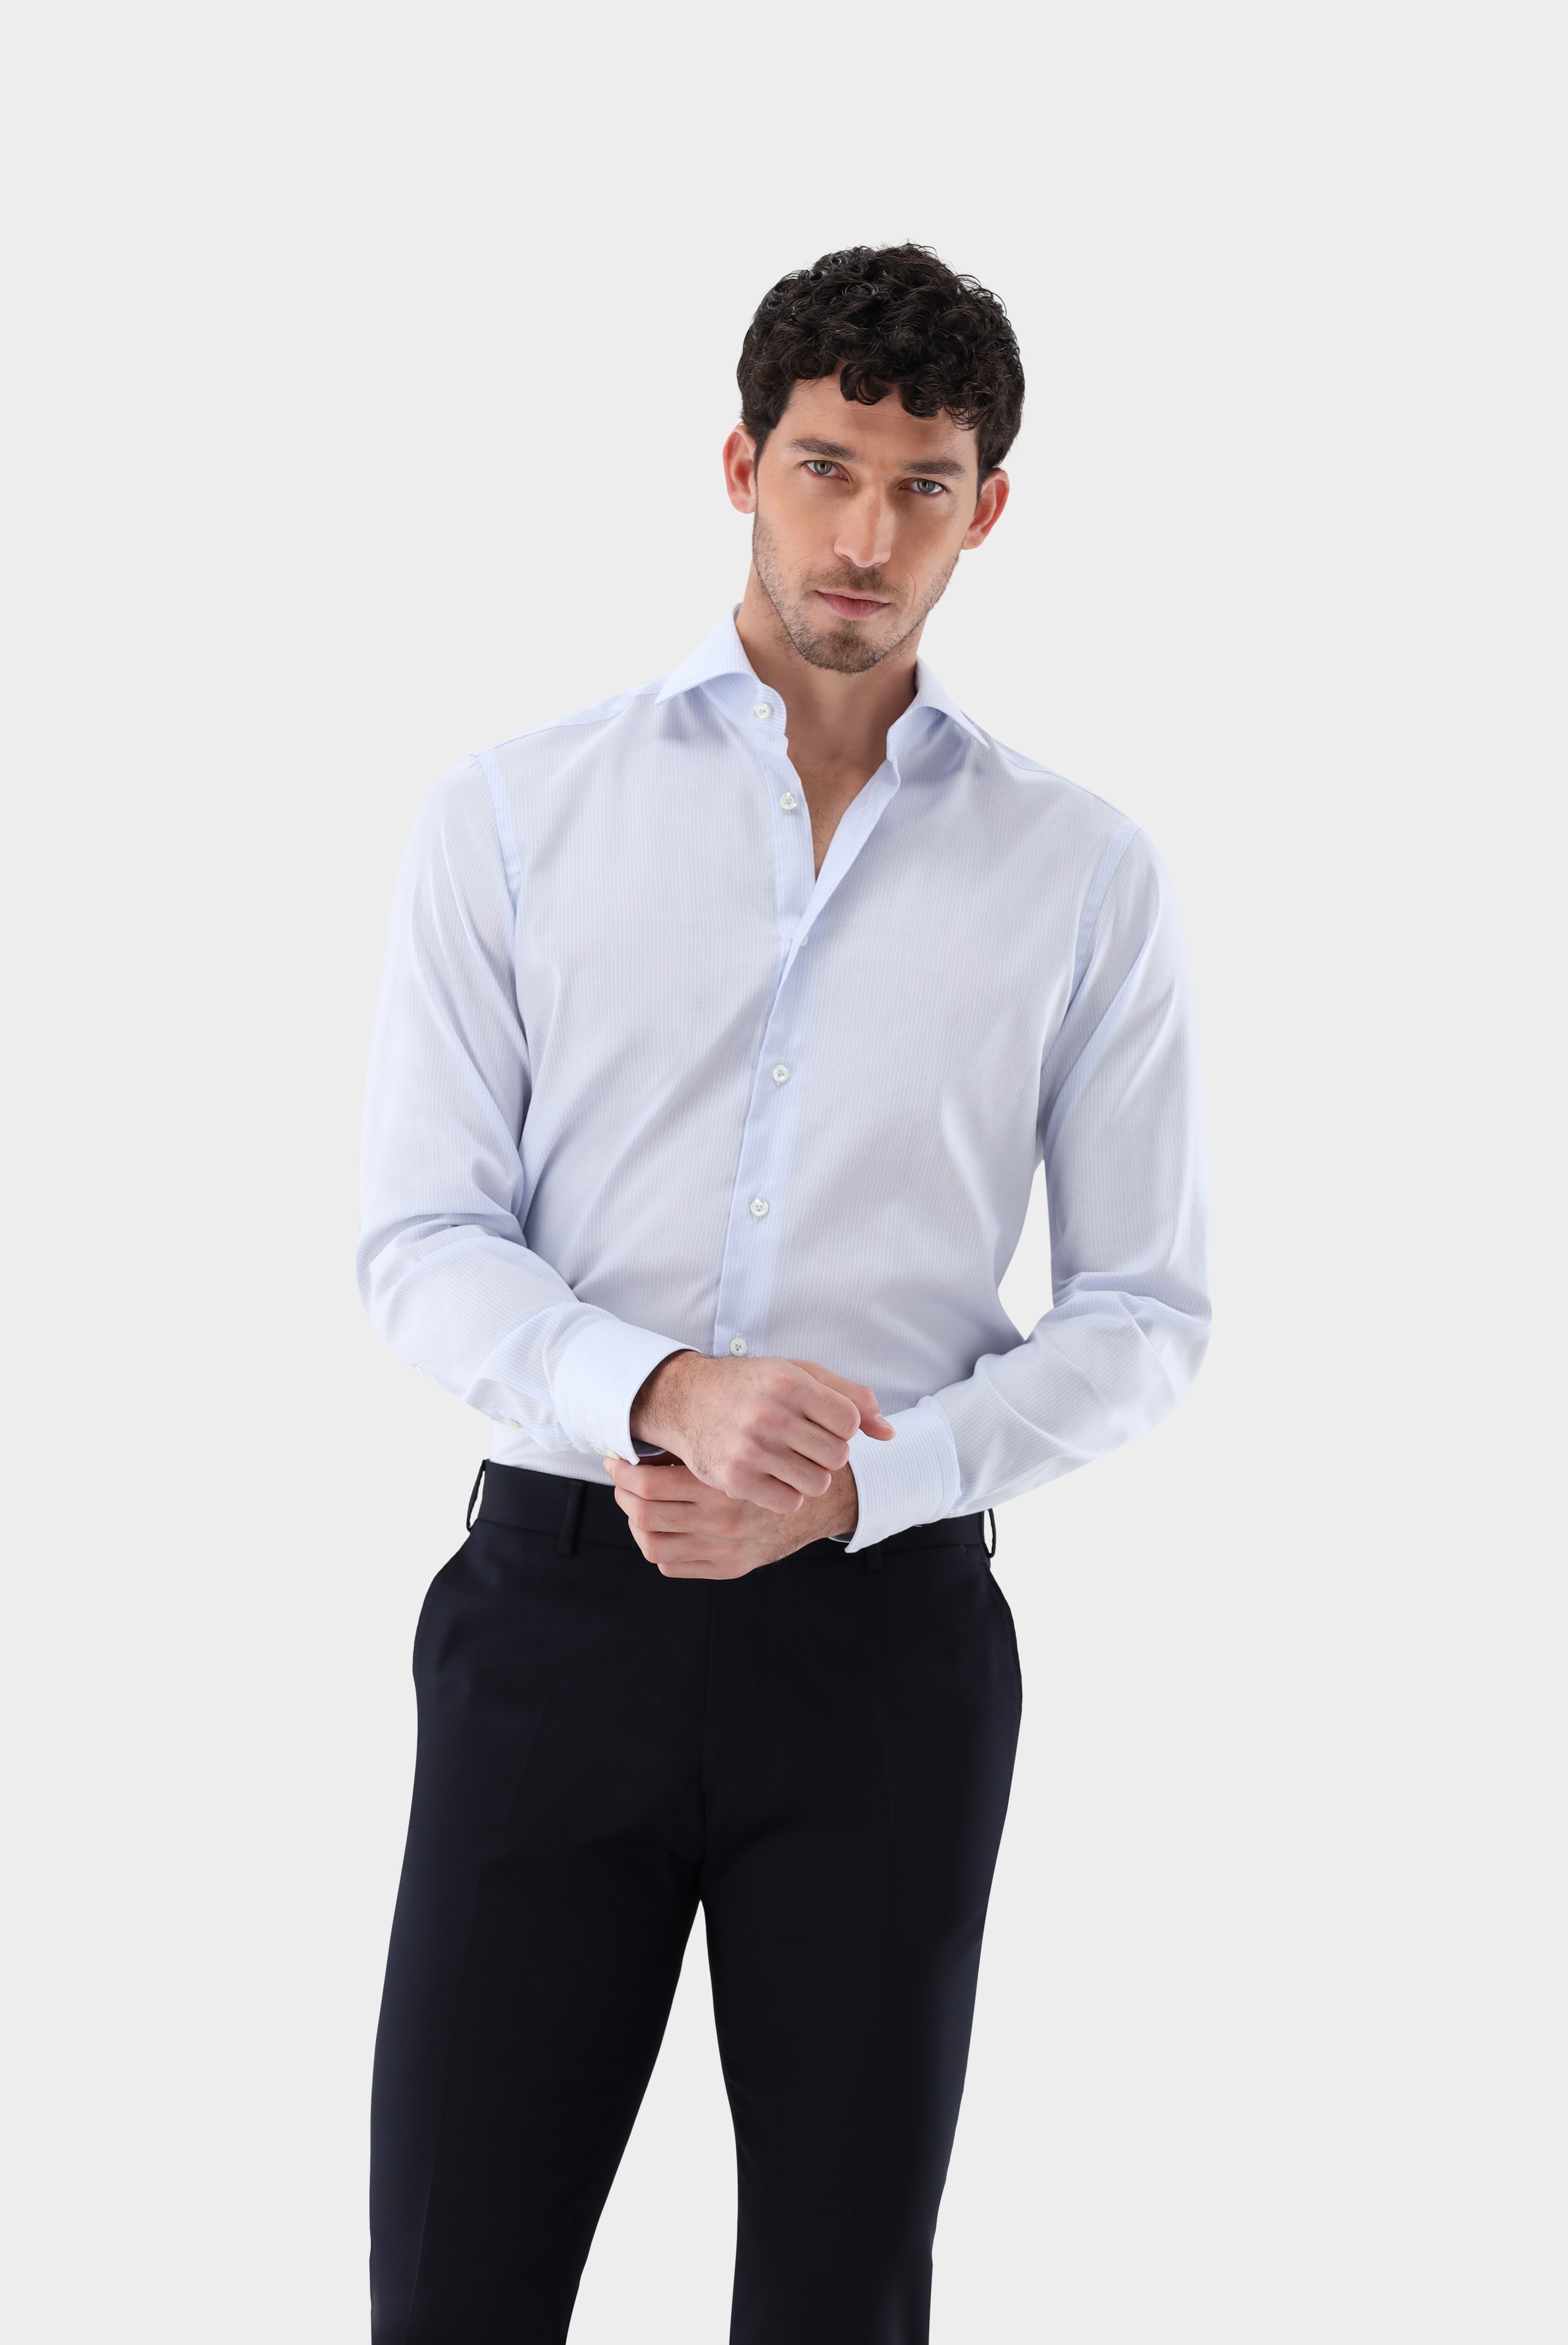 Easy Iron Shirts+Striped Wrinkle Free Shirt Tailor Fit+20.2020.BQ.161109.710.38